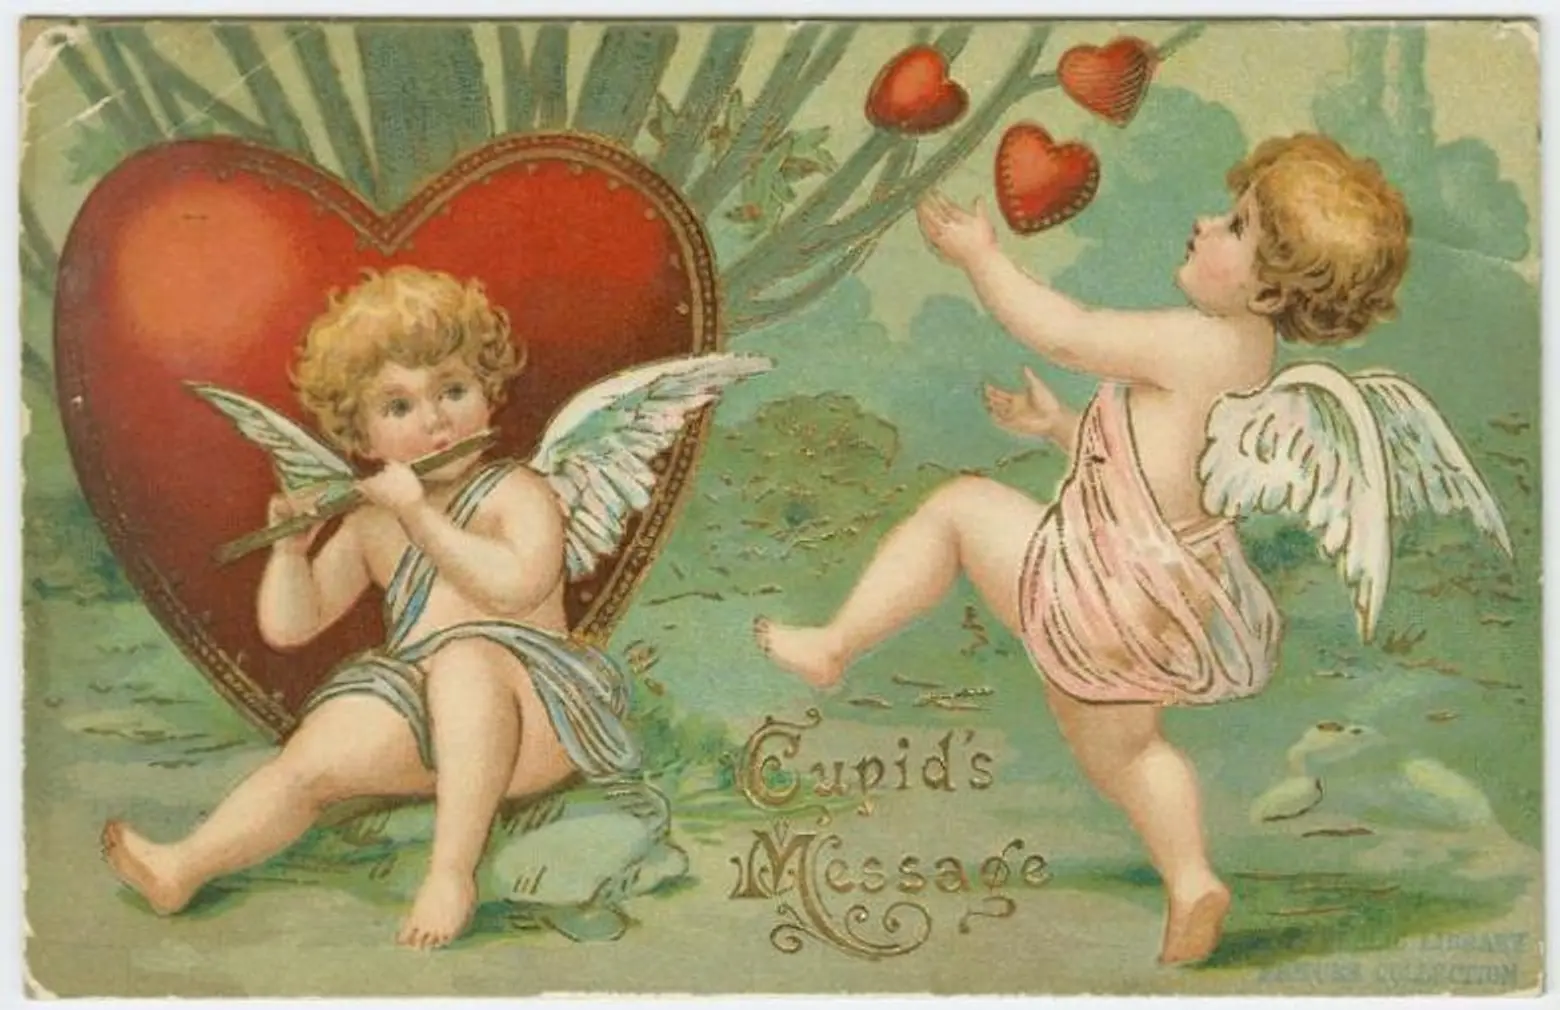 Vintage Valentine's Day Wishes - The New York Times